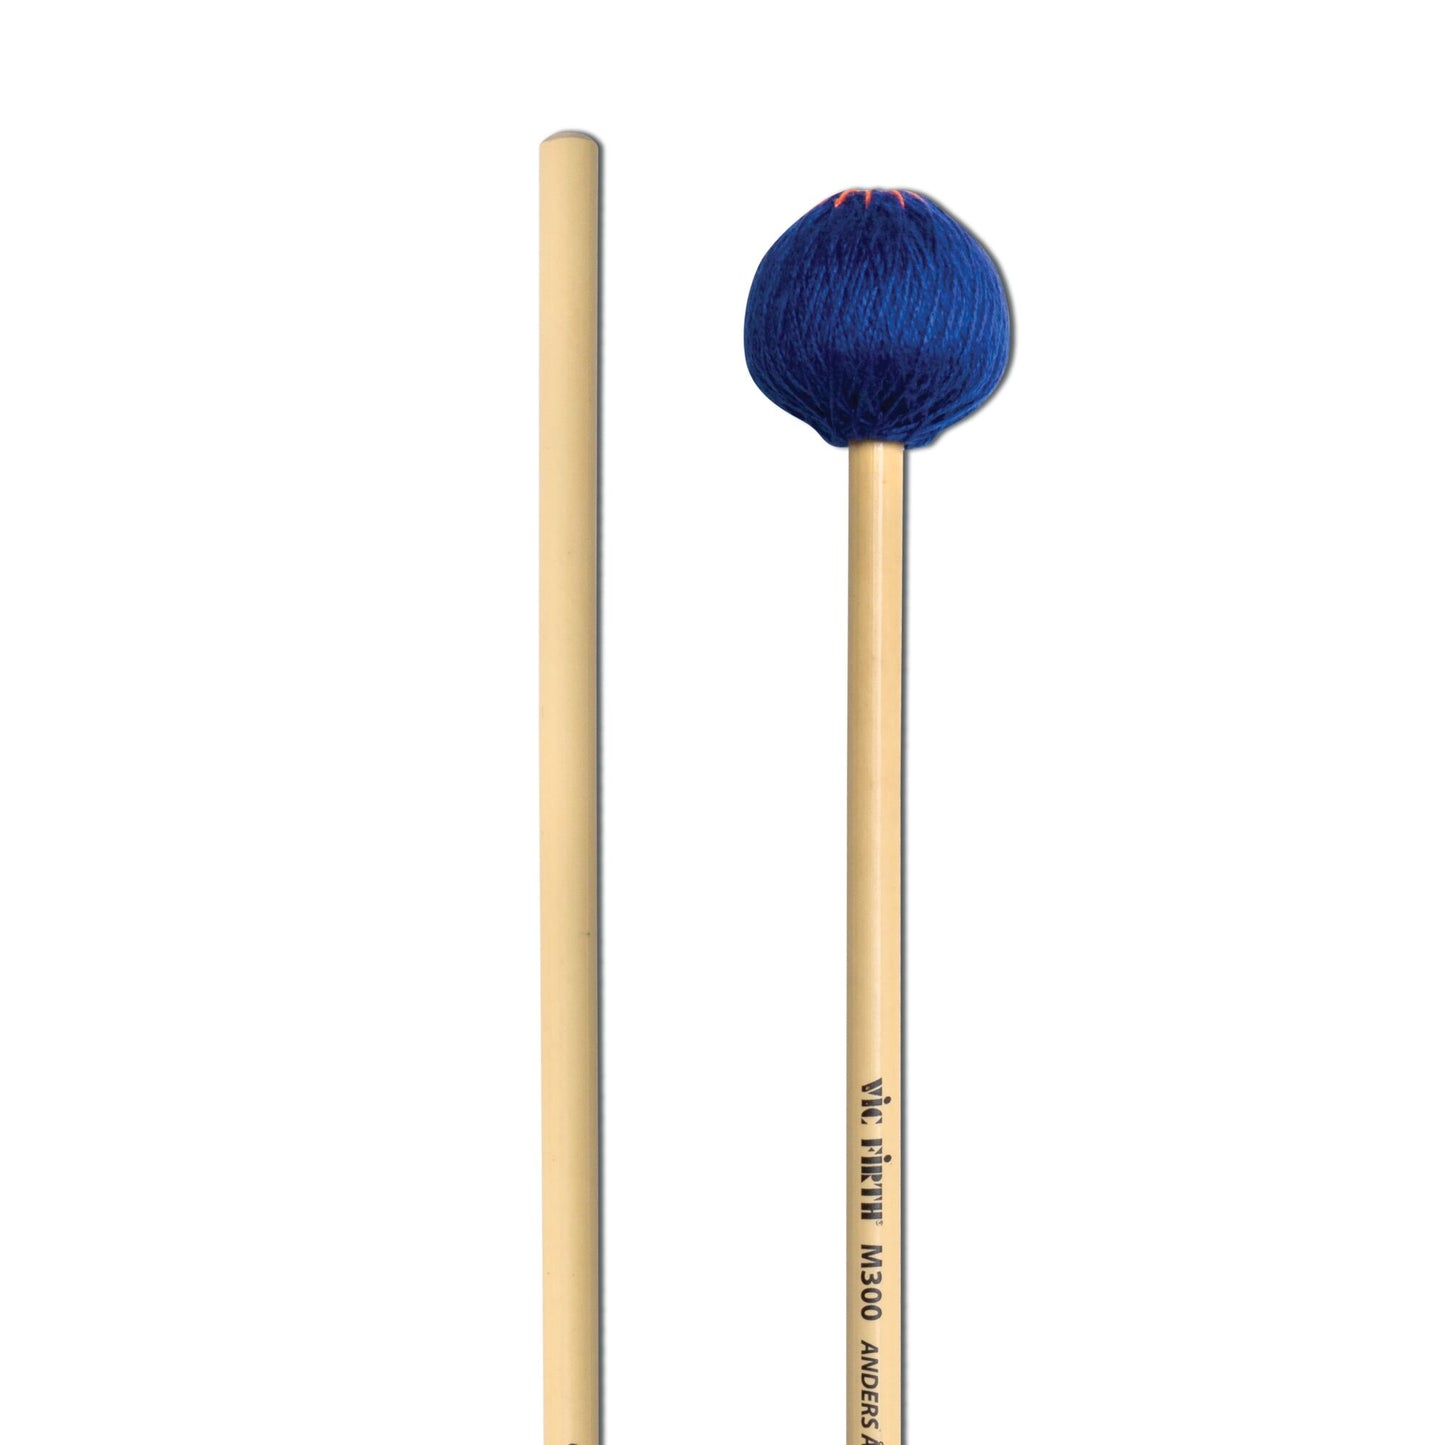 M300 - Anders Astrand Keyboard - Soft, Blue Mallets